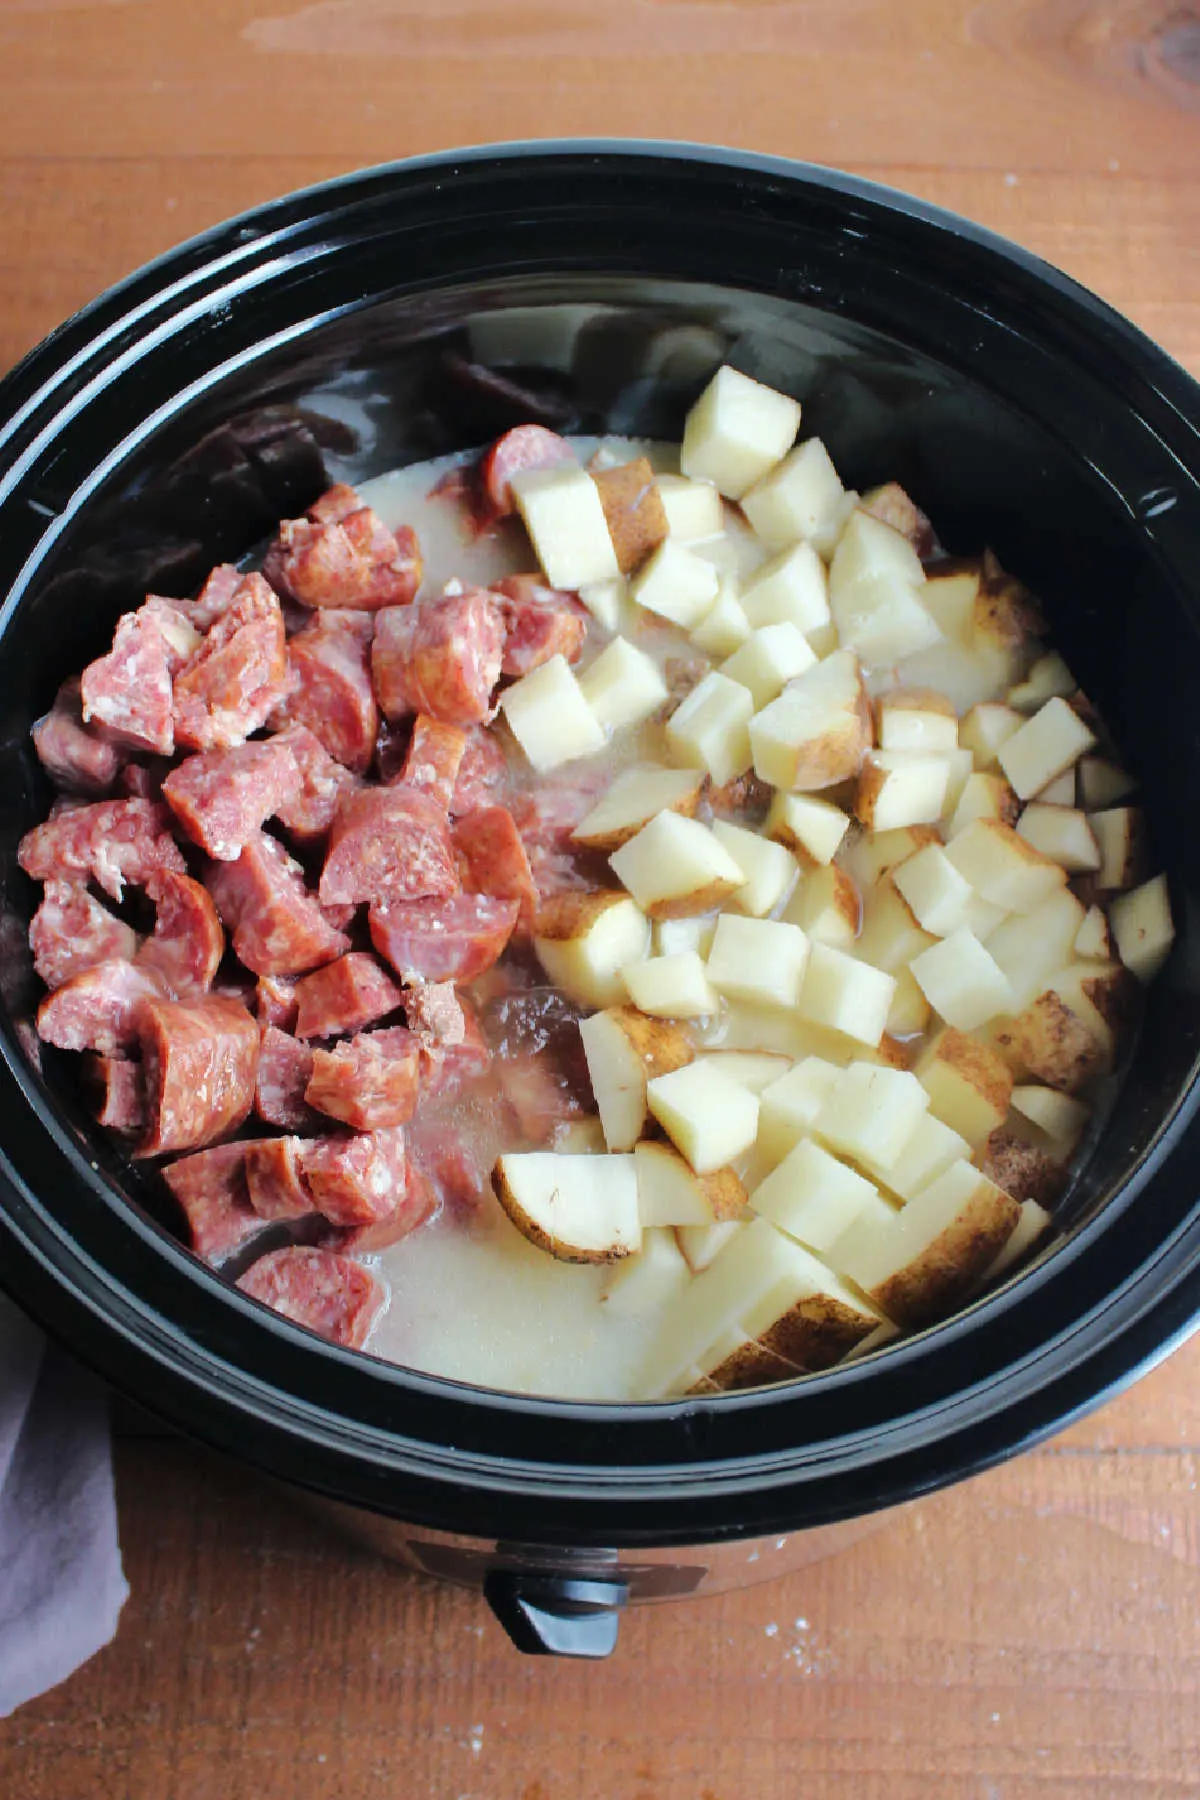 Smoked sausage, diced potatoes, stock and evaporated milk added to crockpot ready to cook.